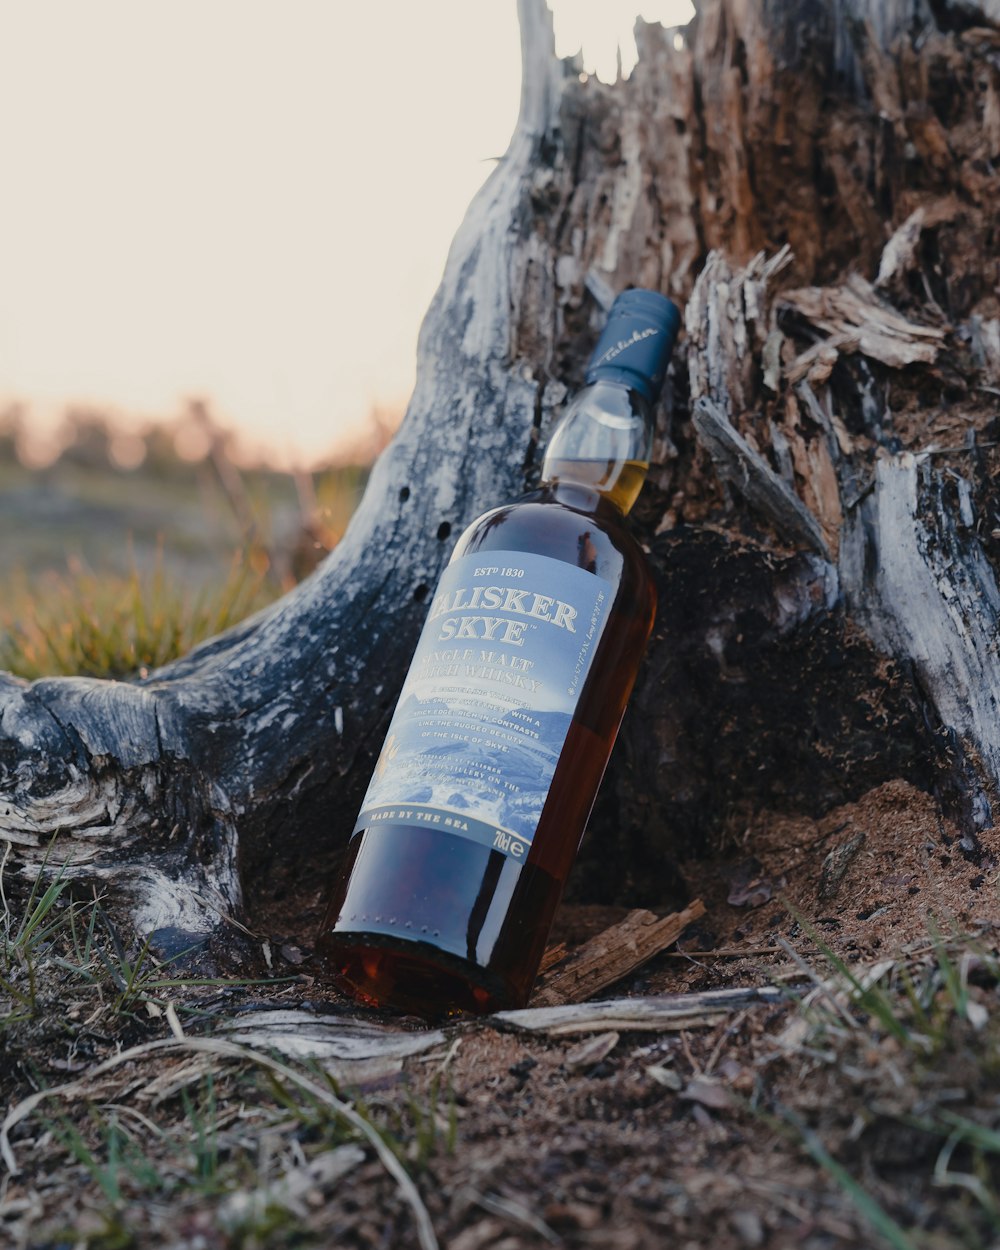 a bottle of whiskey sitting next to a tree stump